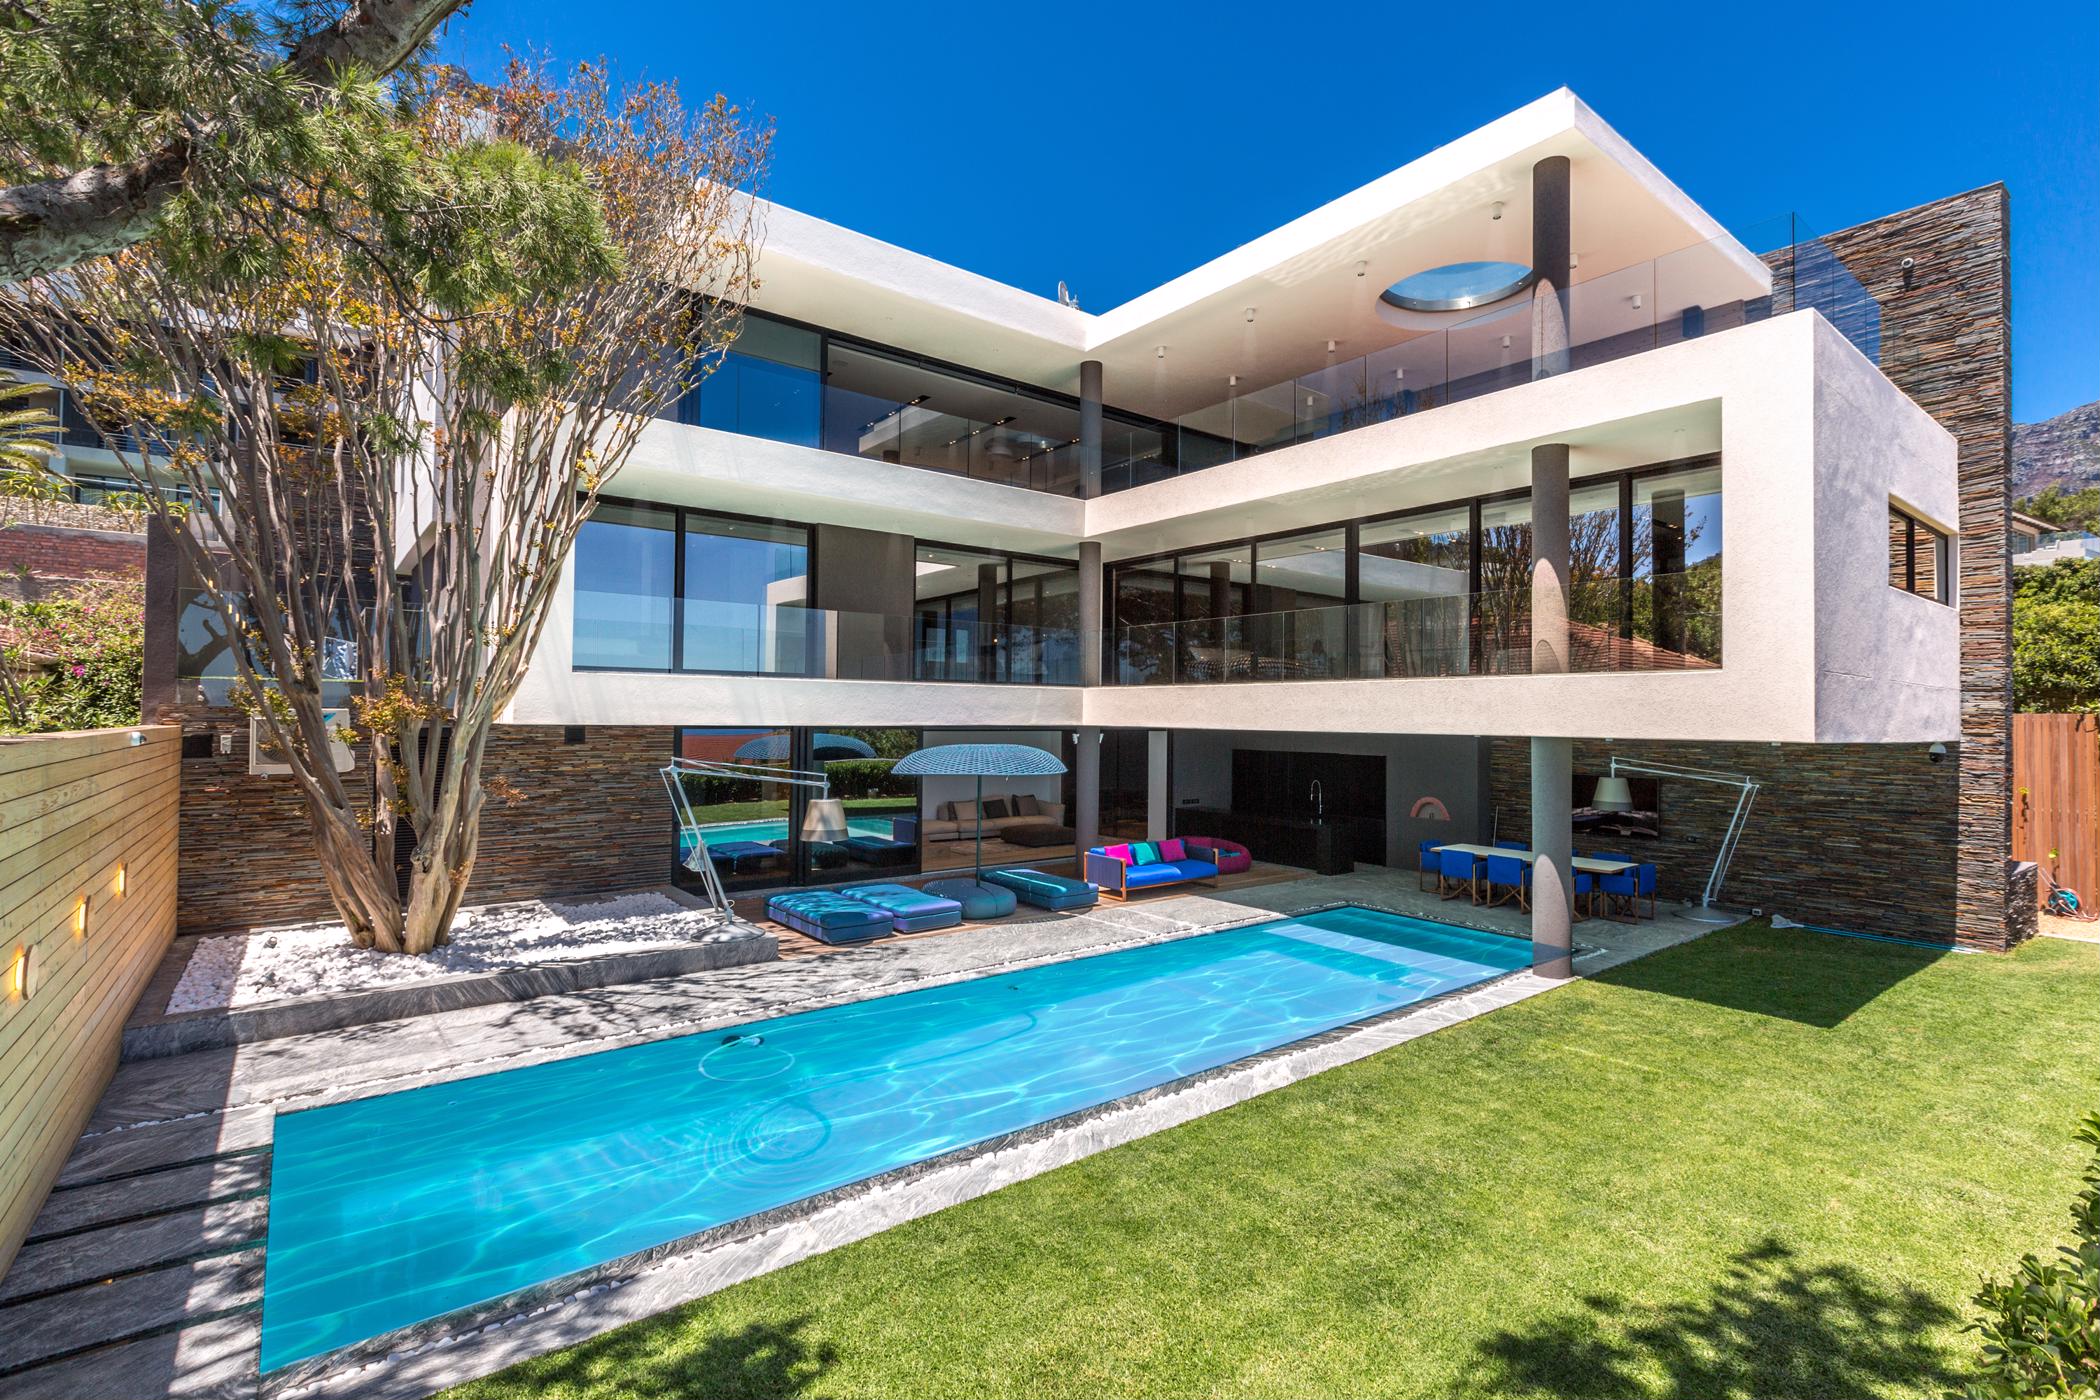 4 bedroom house for sale in Camps Bay